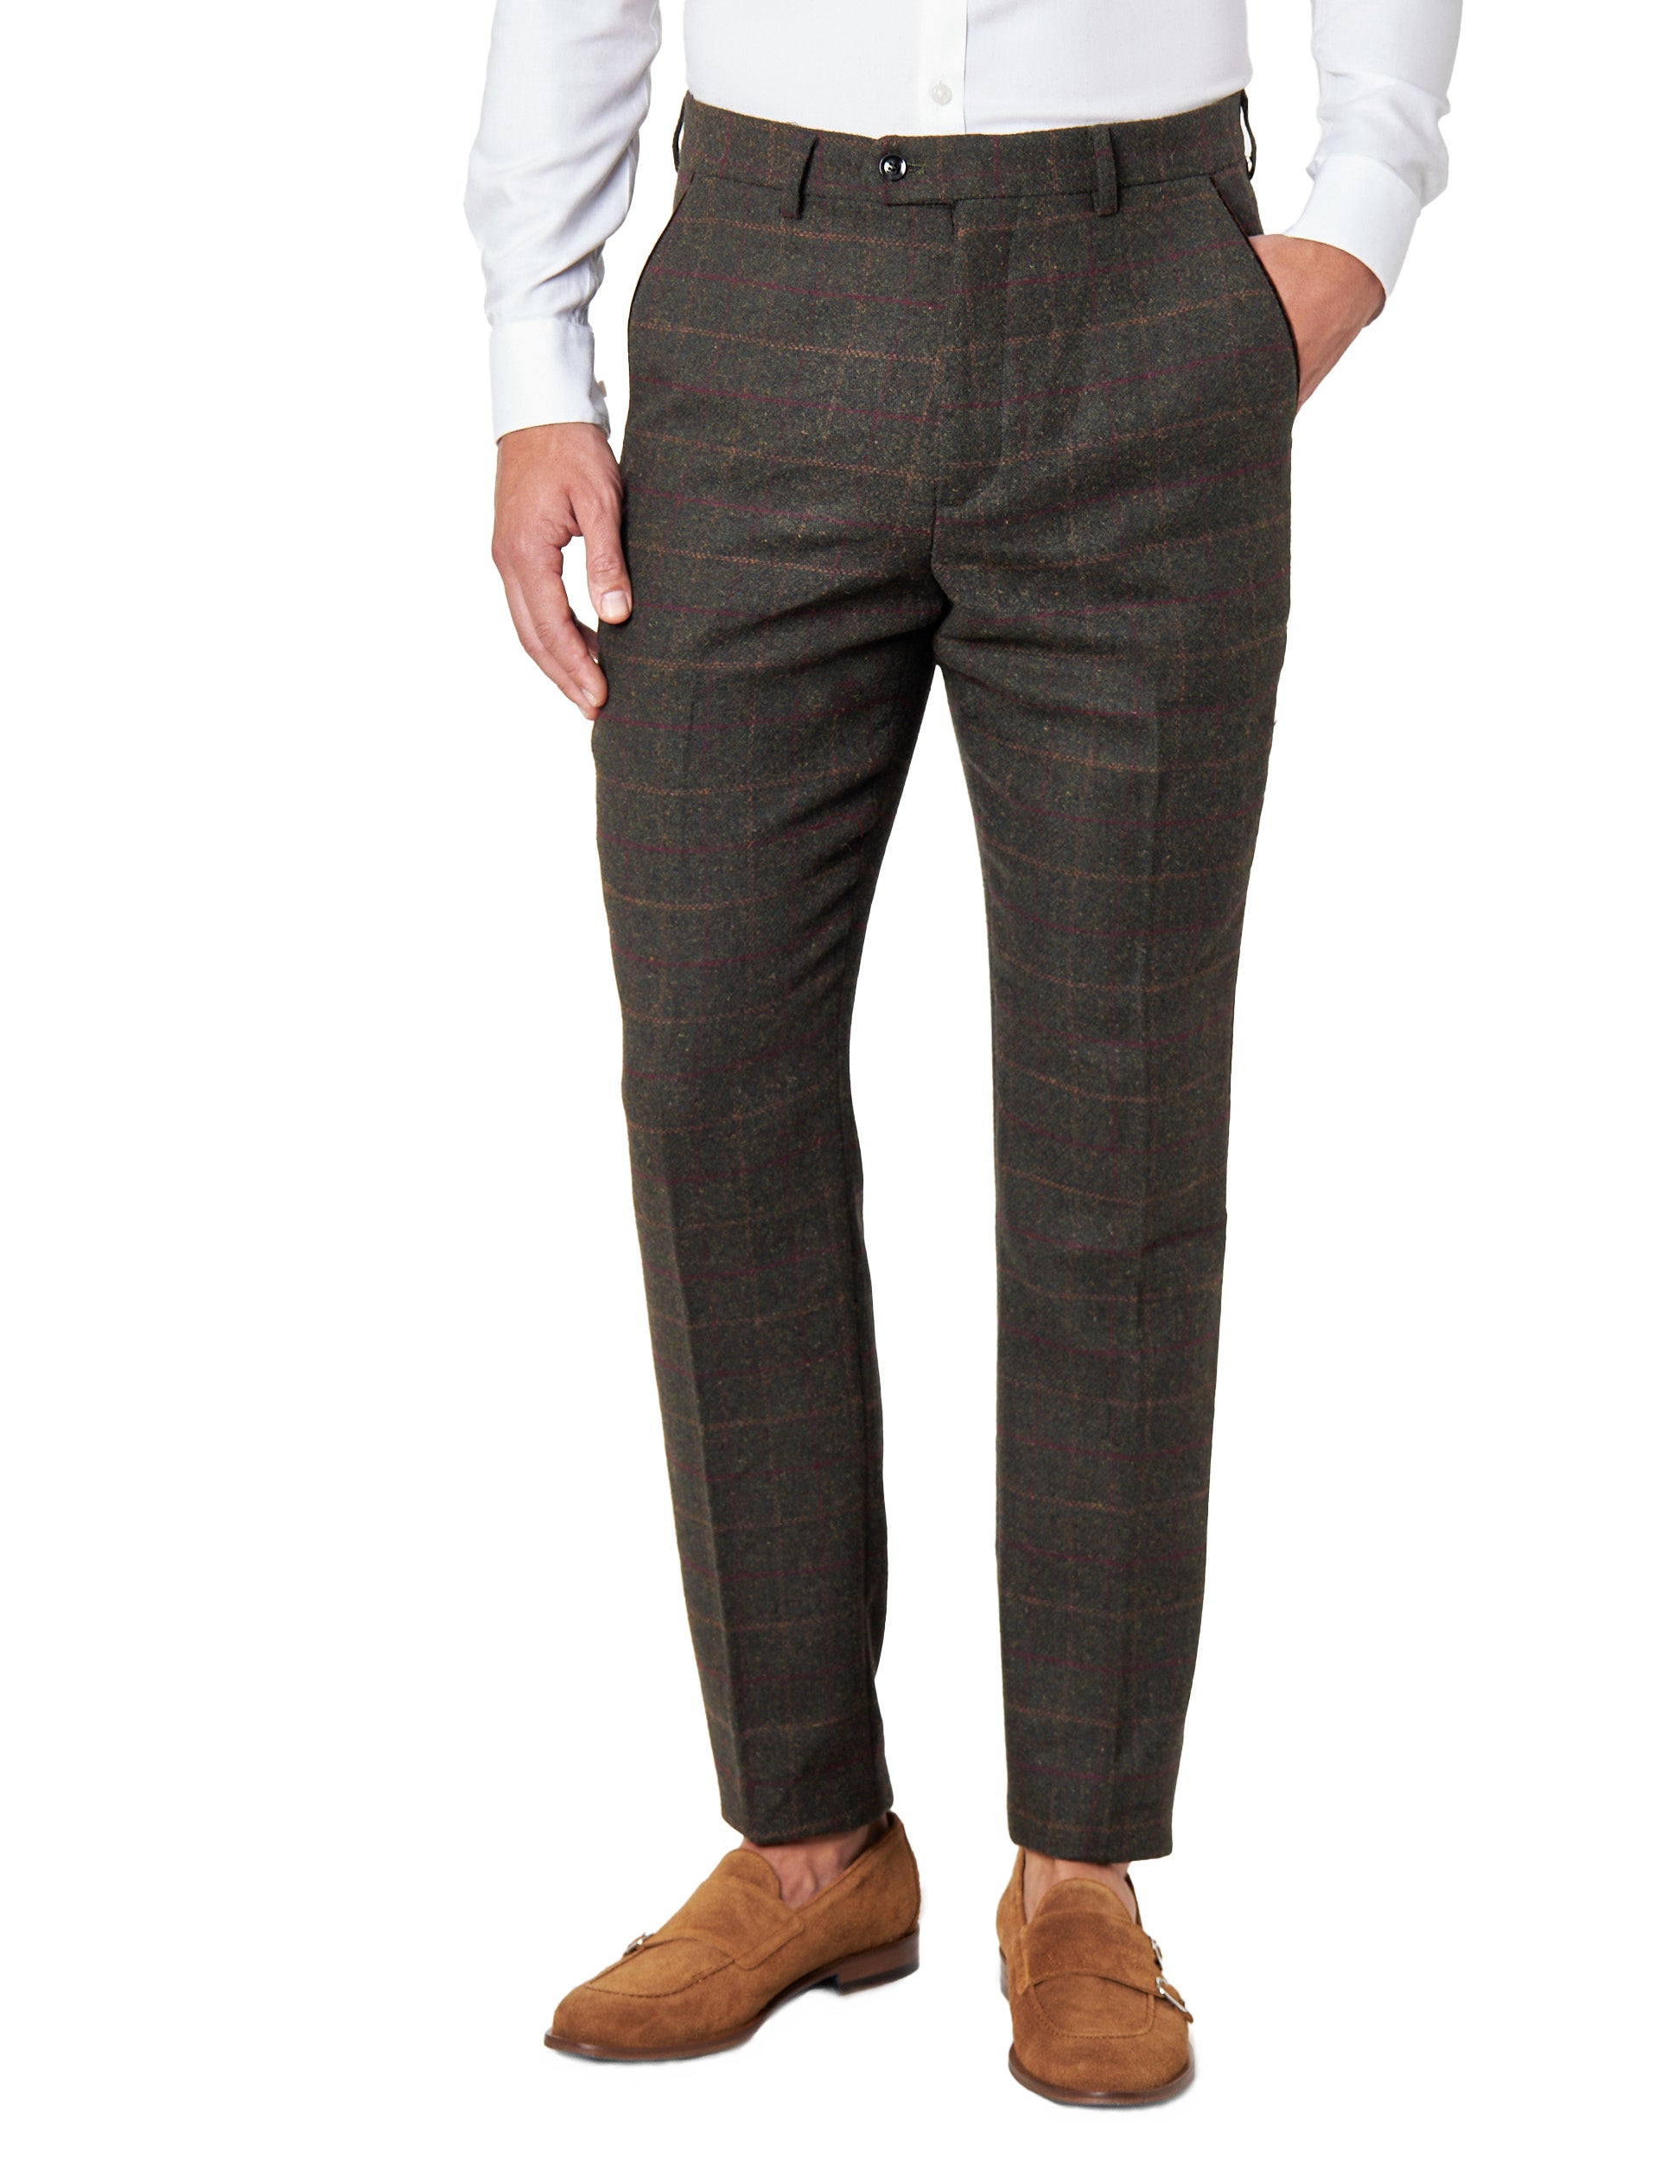 VITORI A2 - Mens Green Vintage Styled Check Herringbone Tailored Fit Trousers